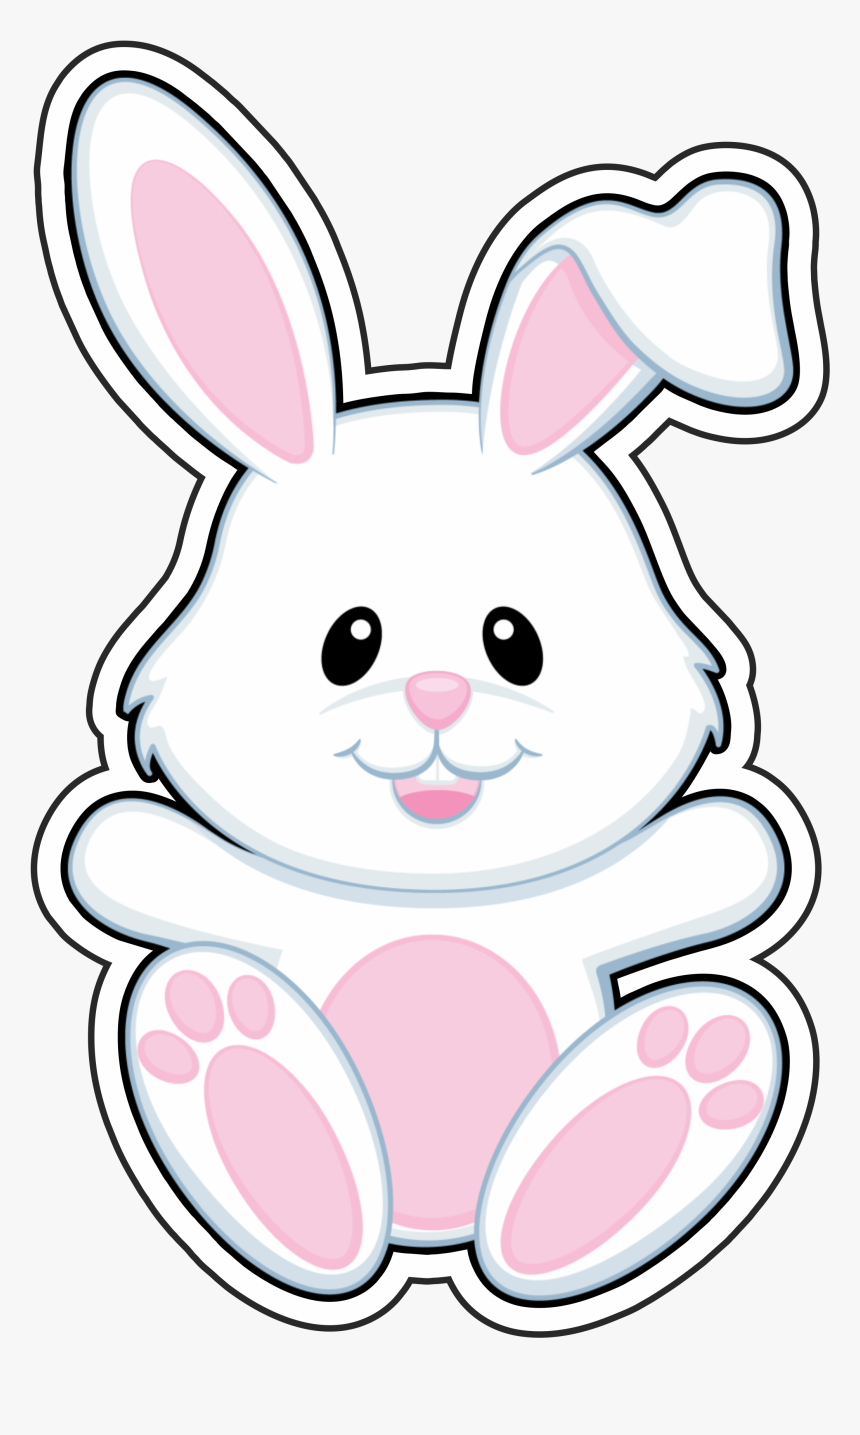 bunny clipart images